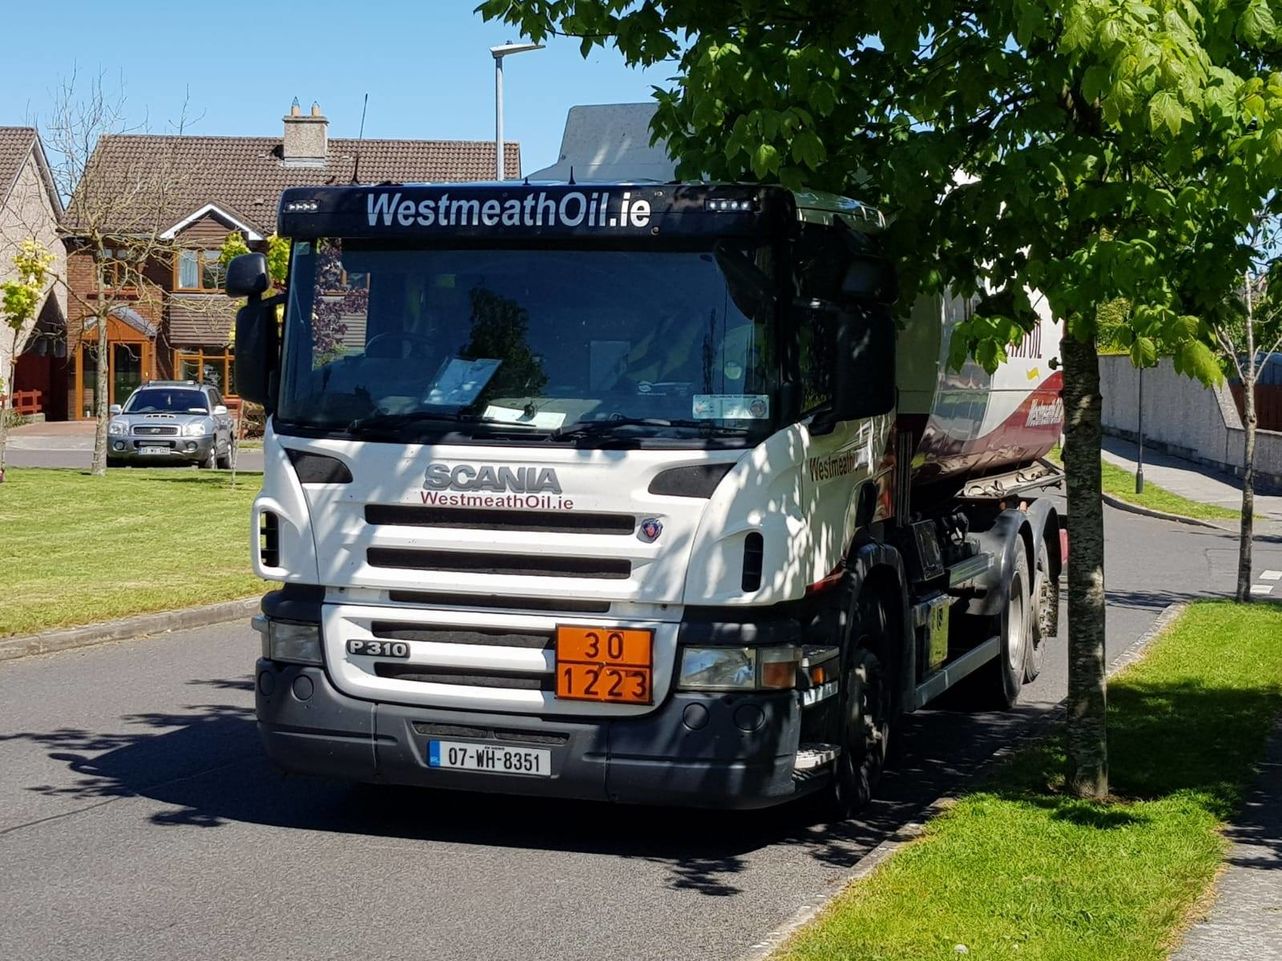 Westmeath Oil truck delivering fuel to a satisfied customer